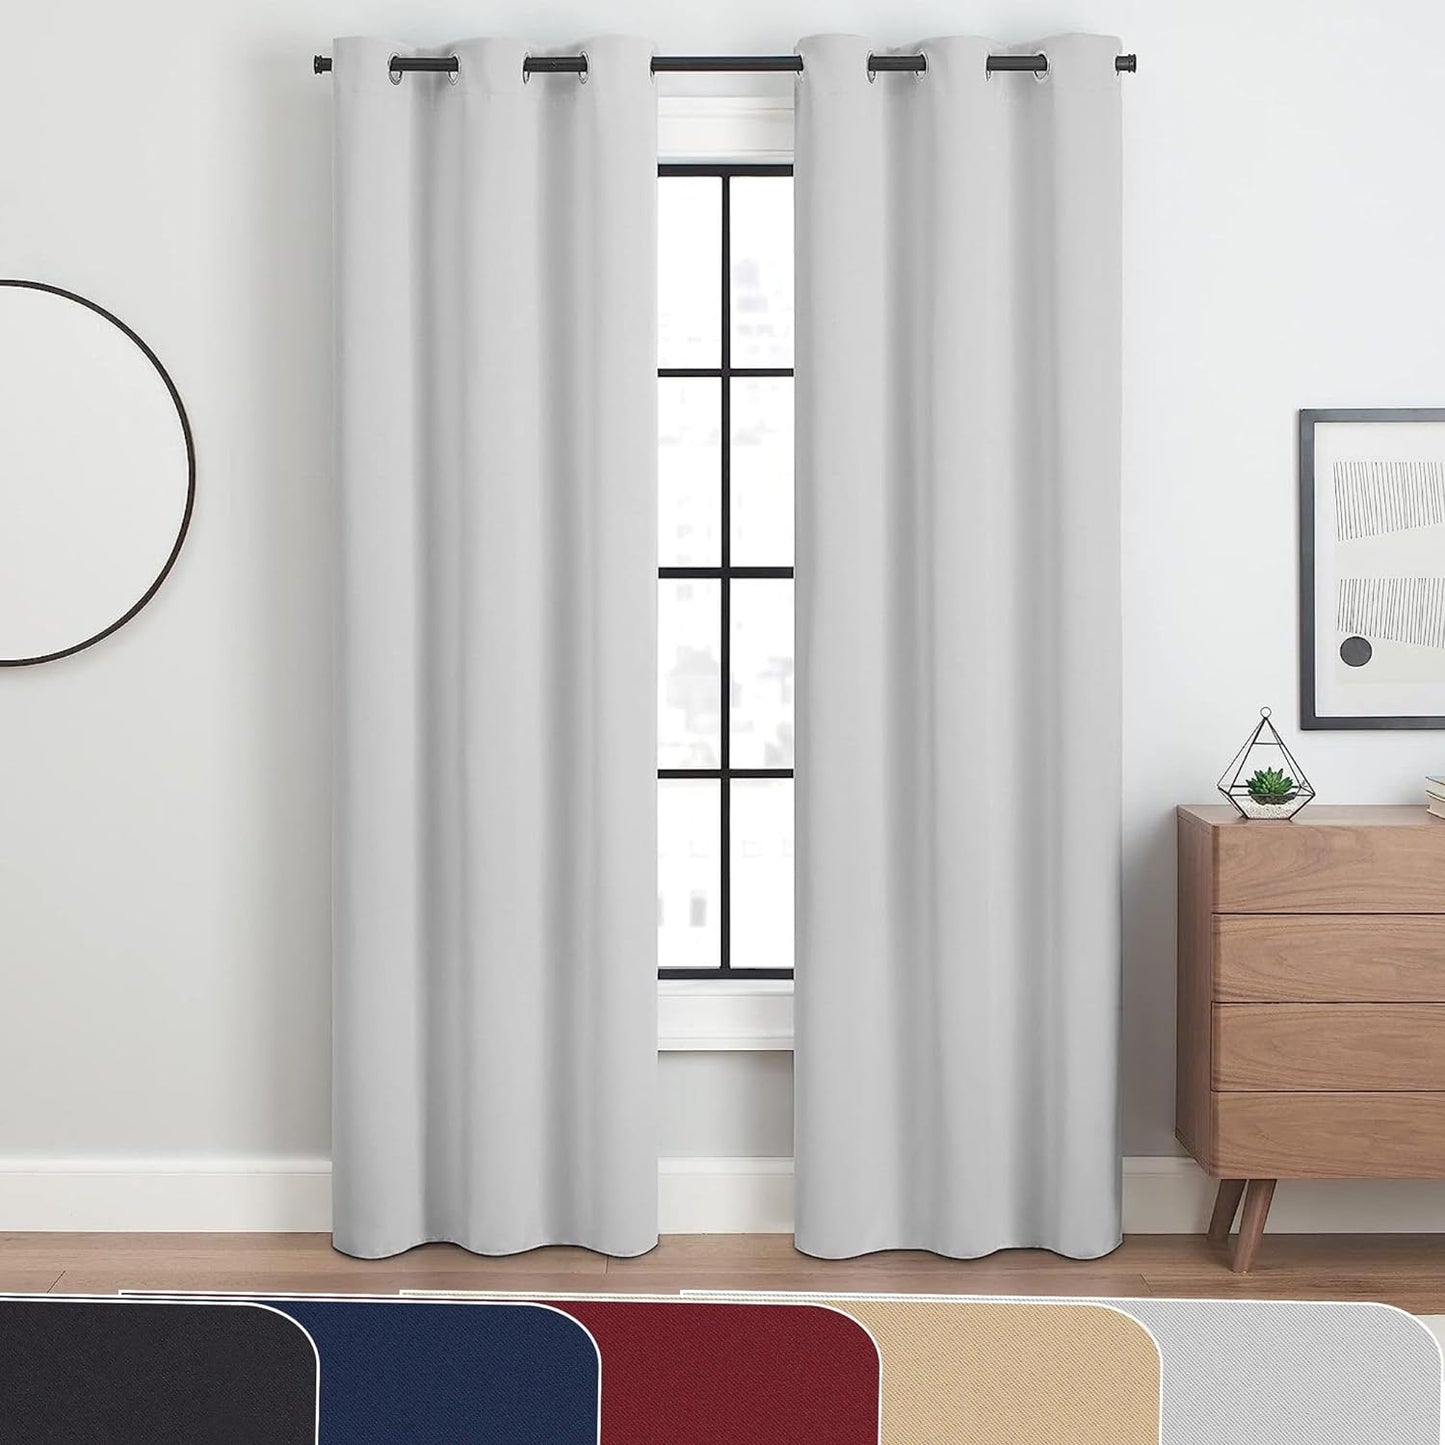 ECLIPSE Andover Solid Tripleweave Thermal Blackout Grommet Curtains for Bedroom (2 Panels), 42 in X 108 In, Navy  Keeco LLC Silver White 42 In X 84 In 